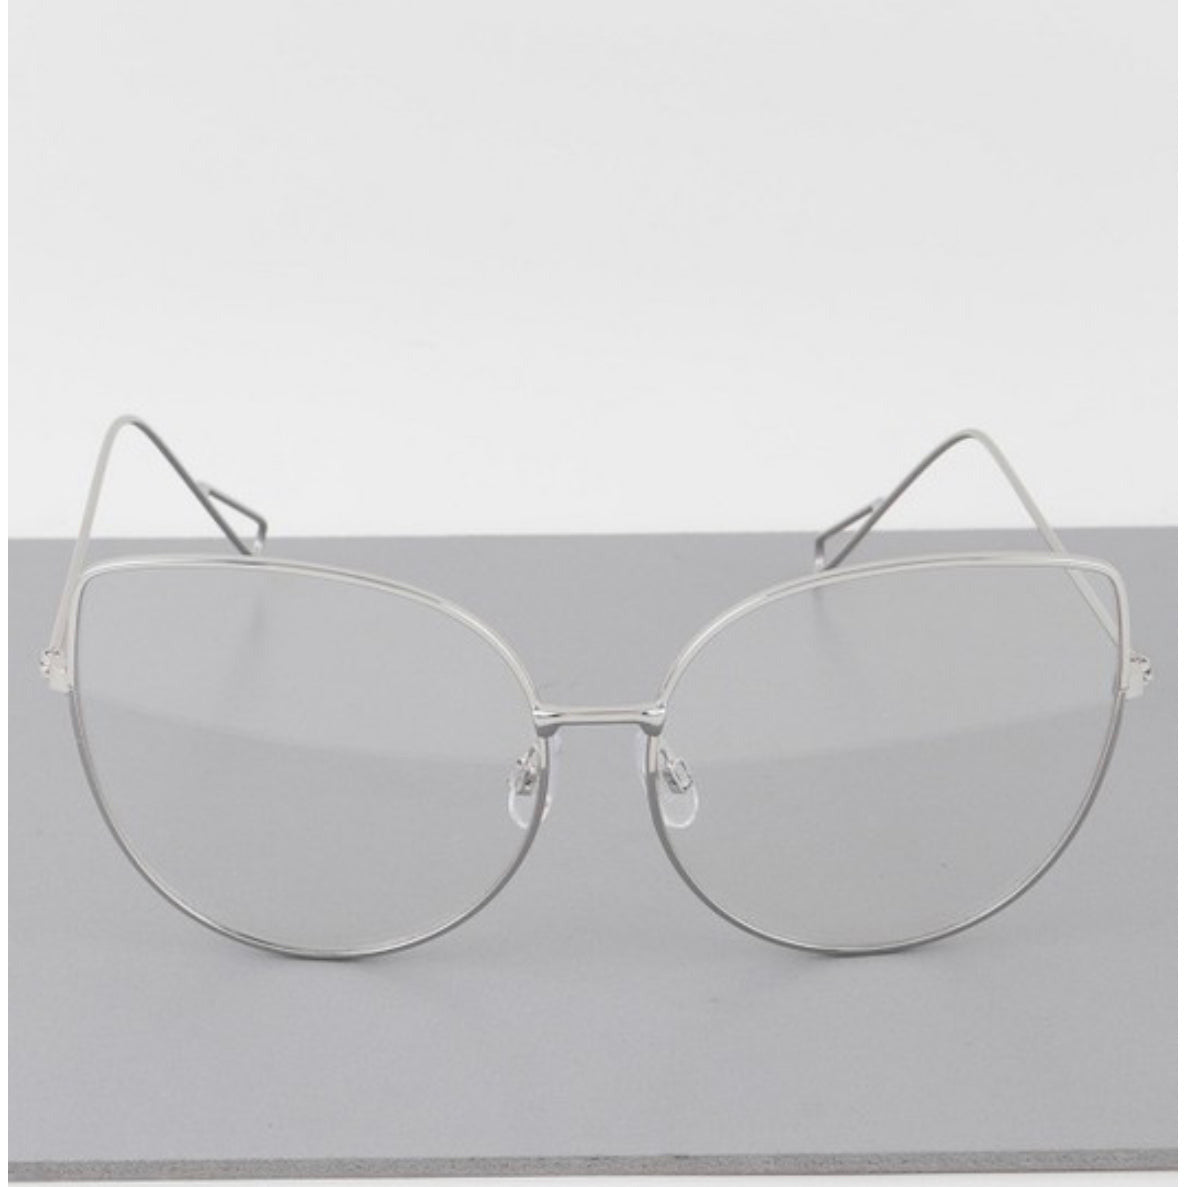 Rounded Cateye Eyeglasses in Silver